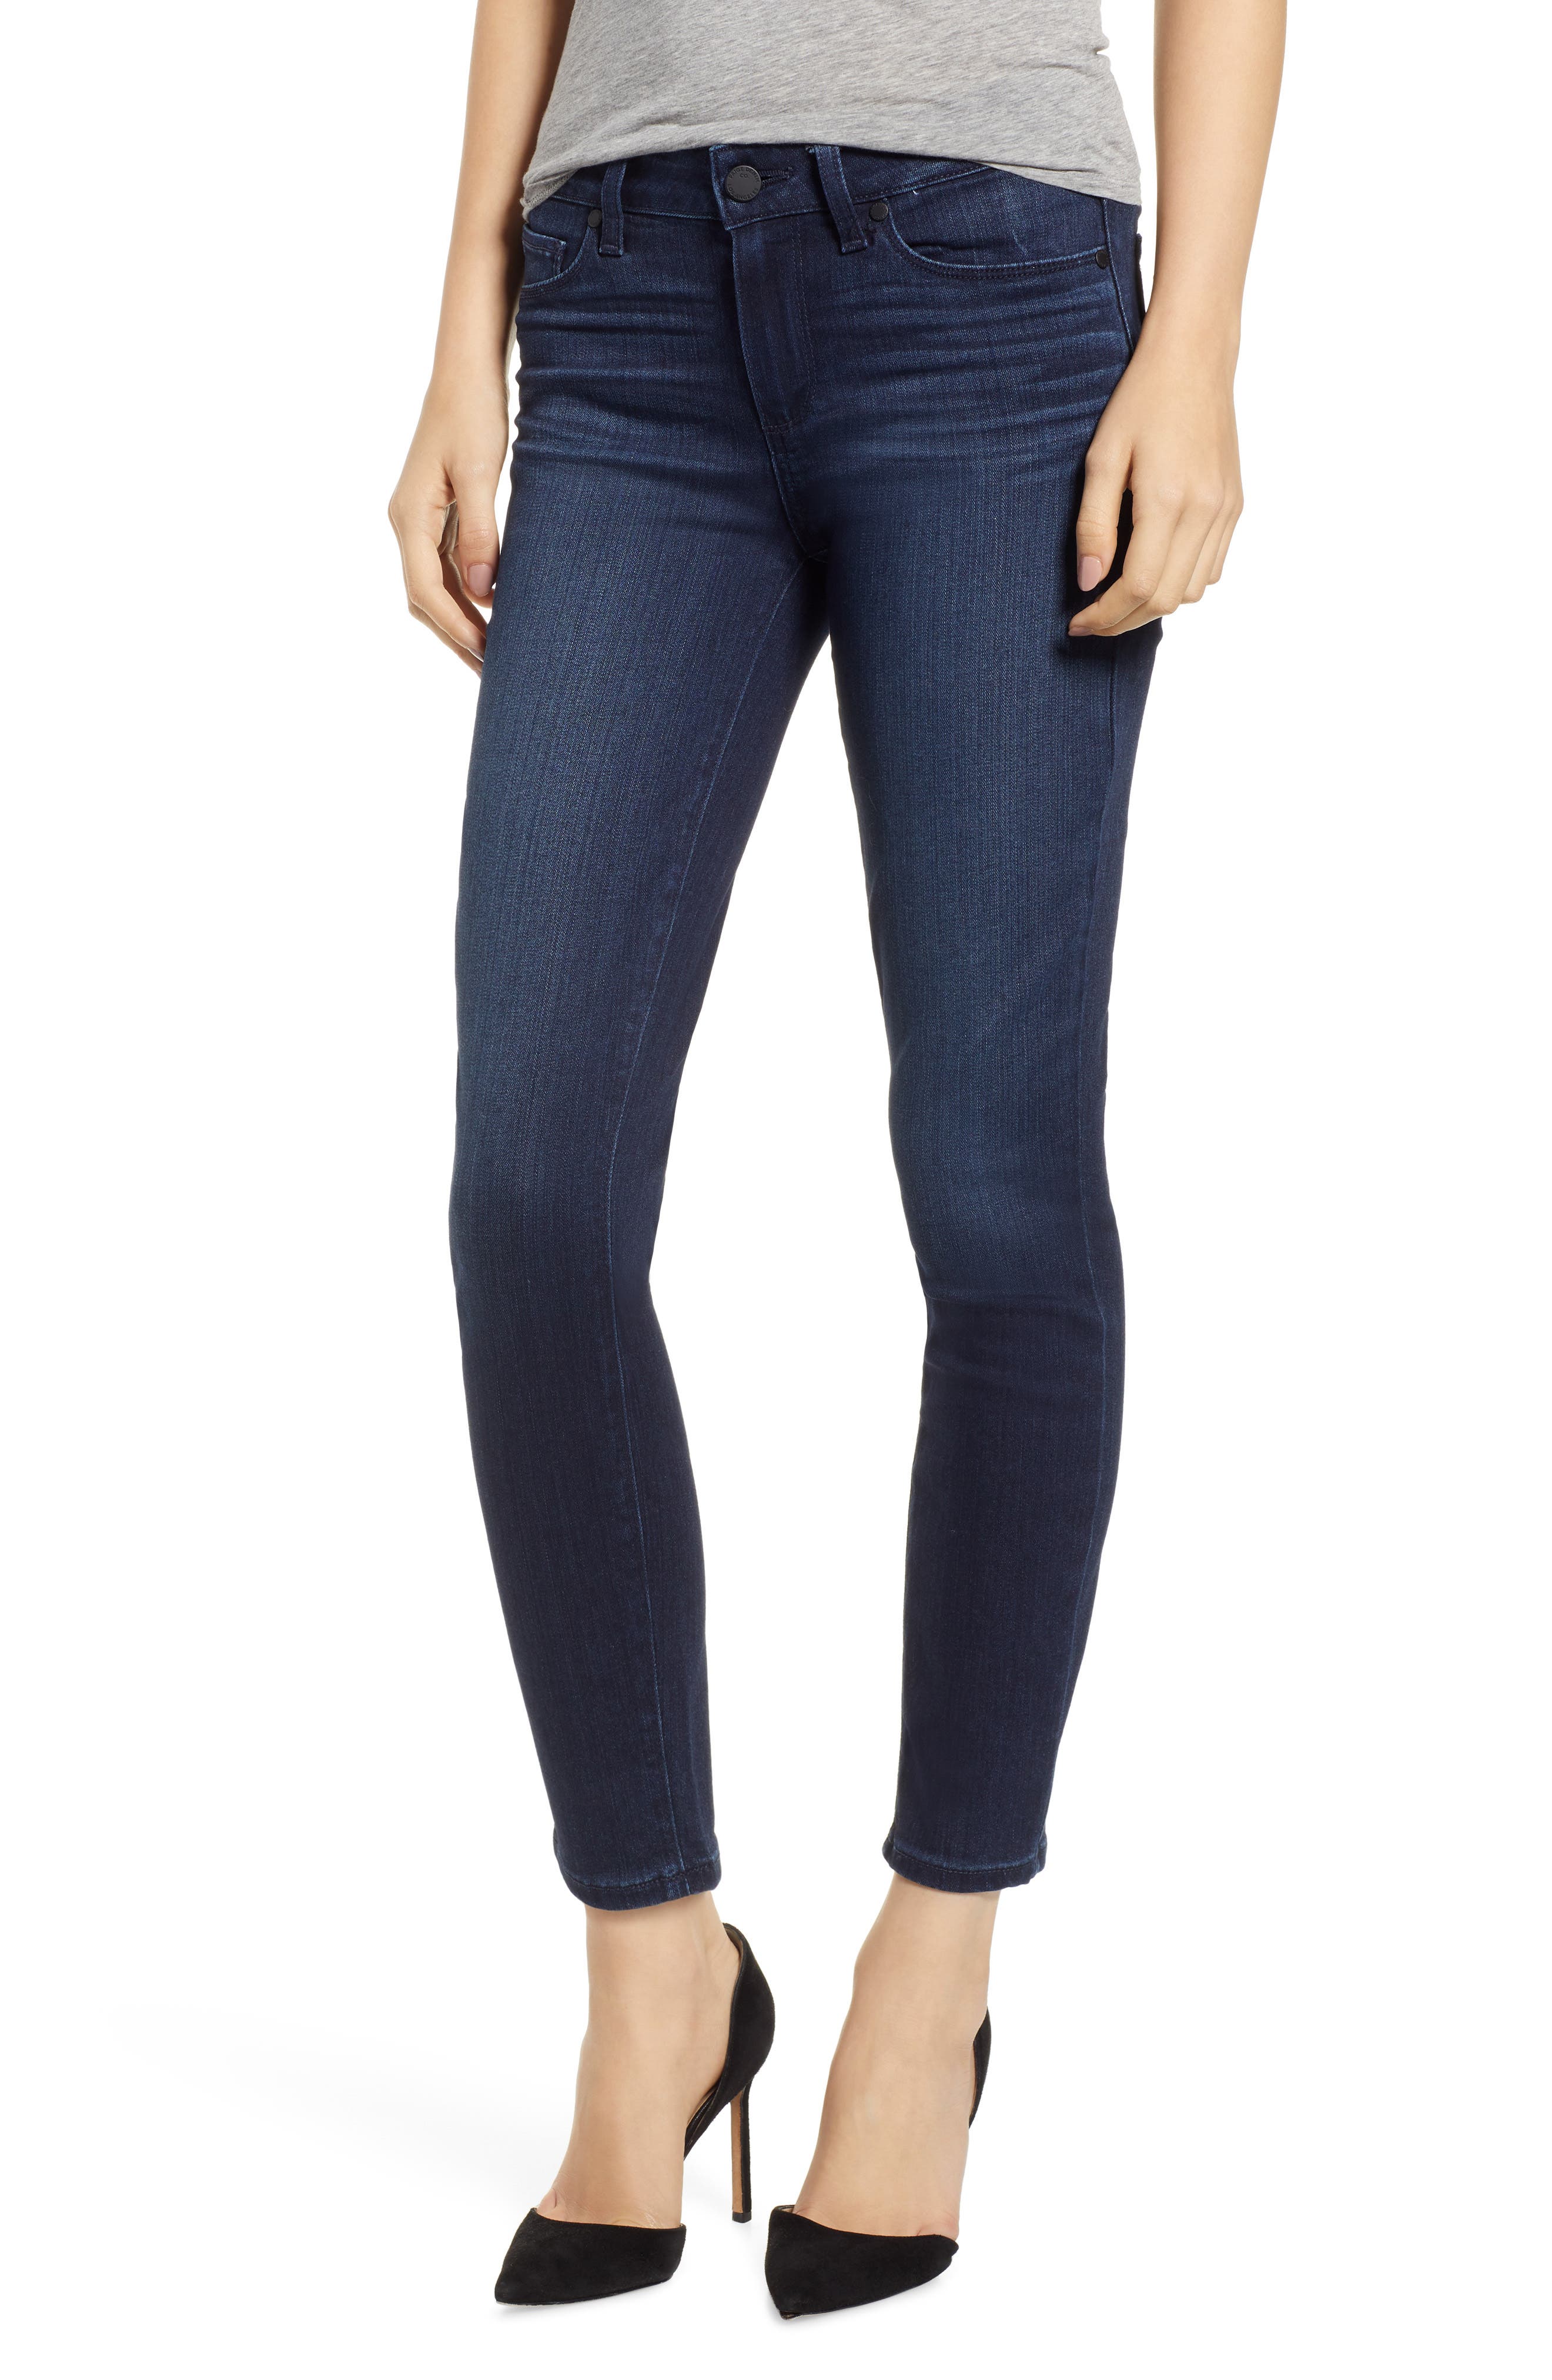 paige verdugo ankle mid rise ultra skinny